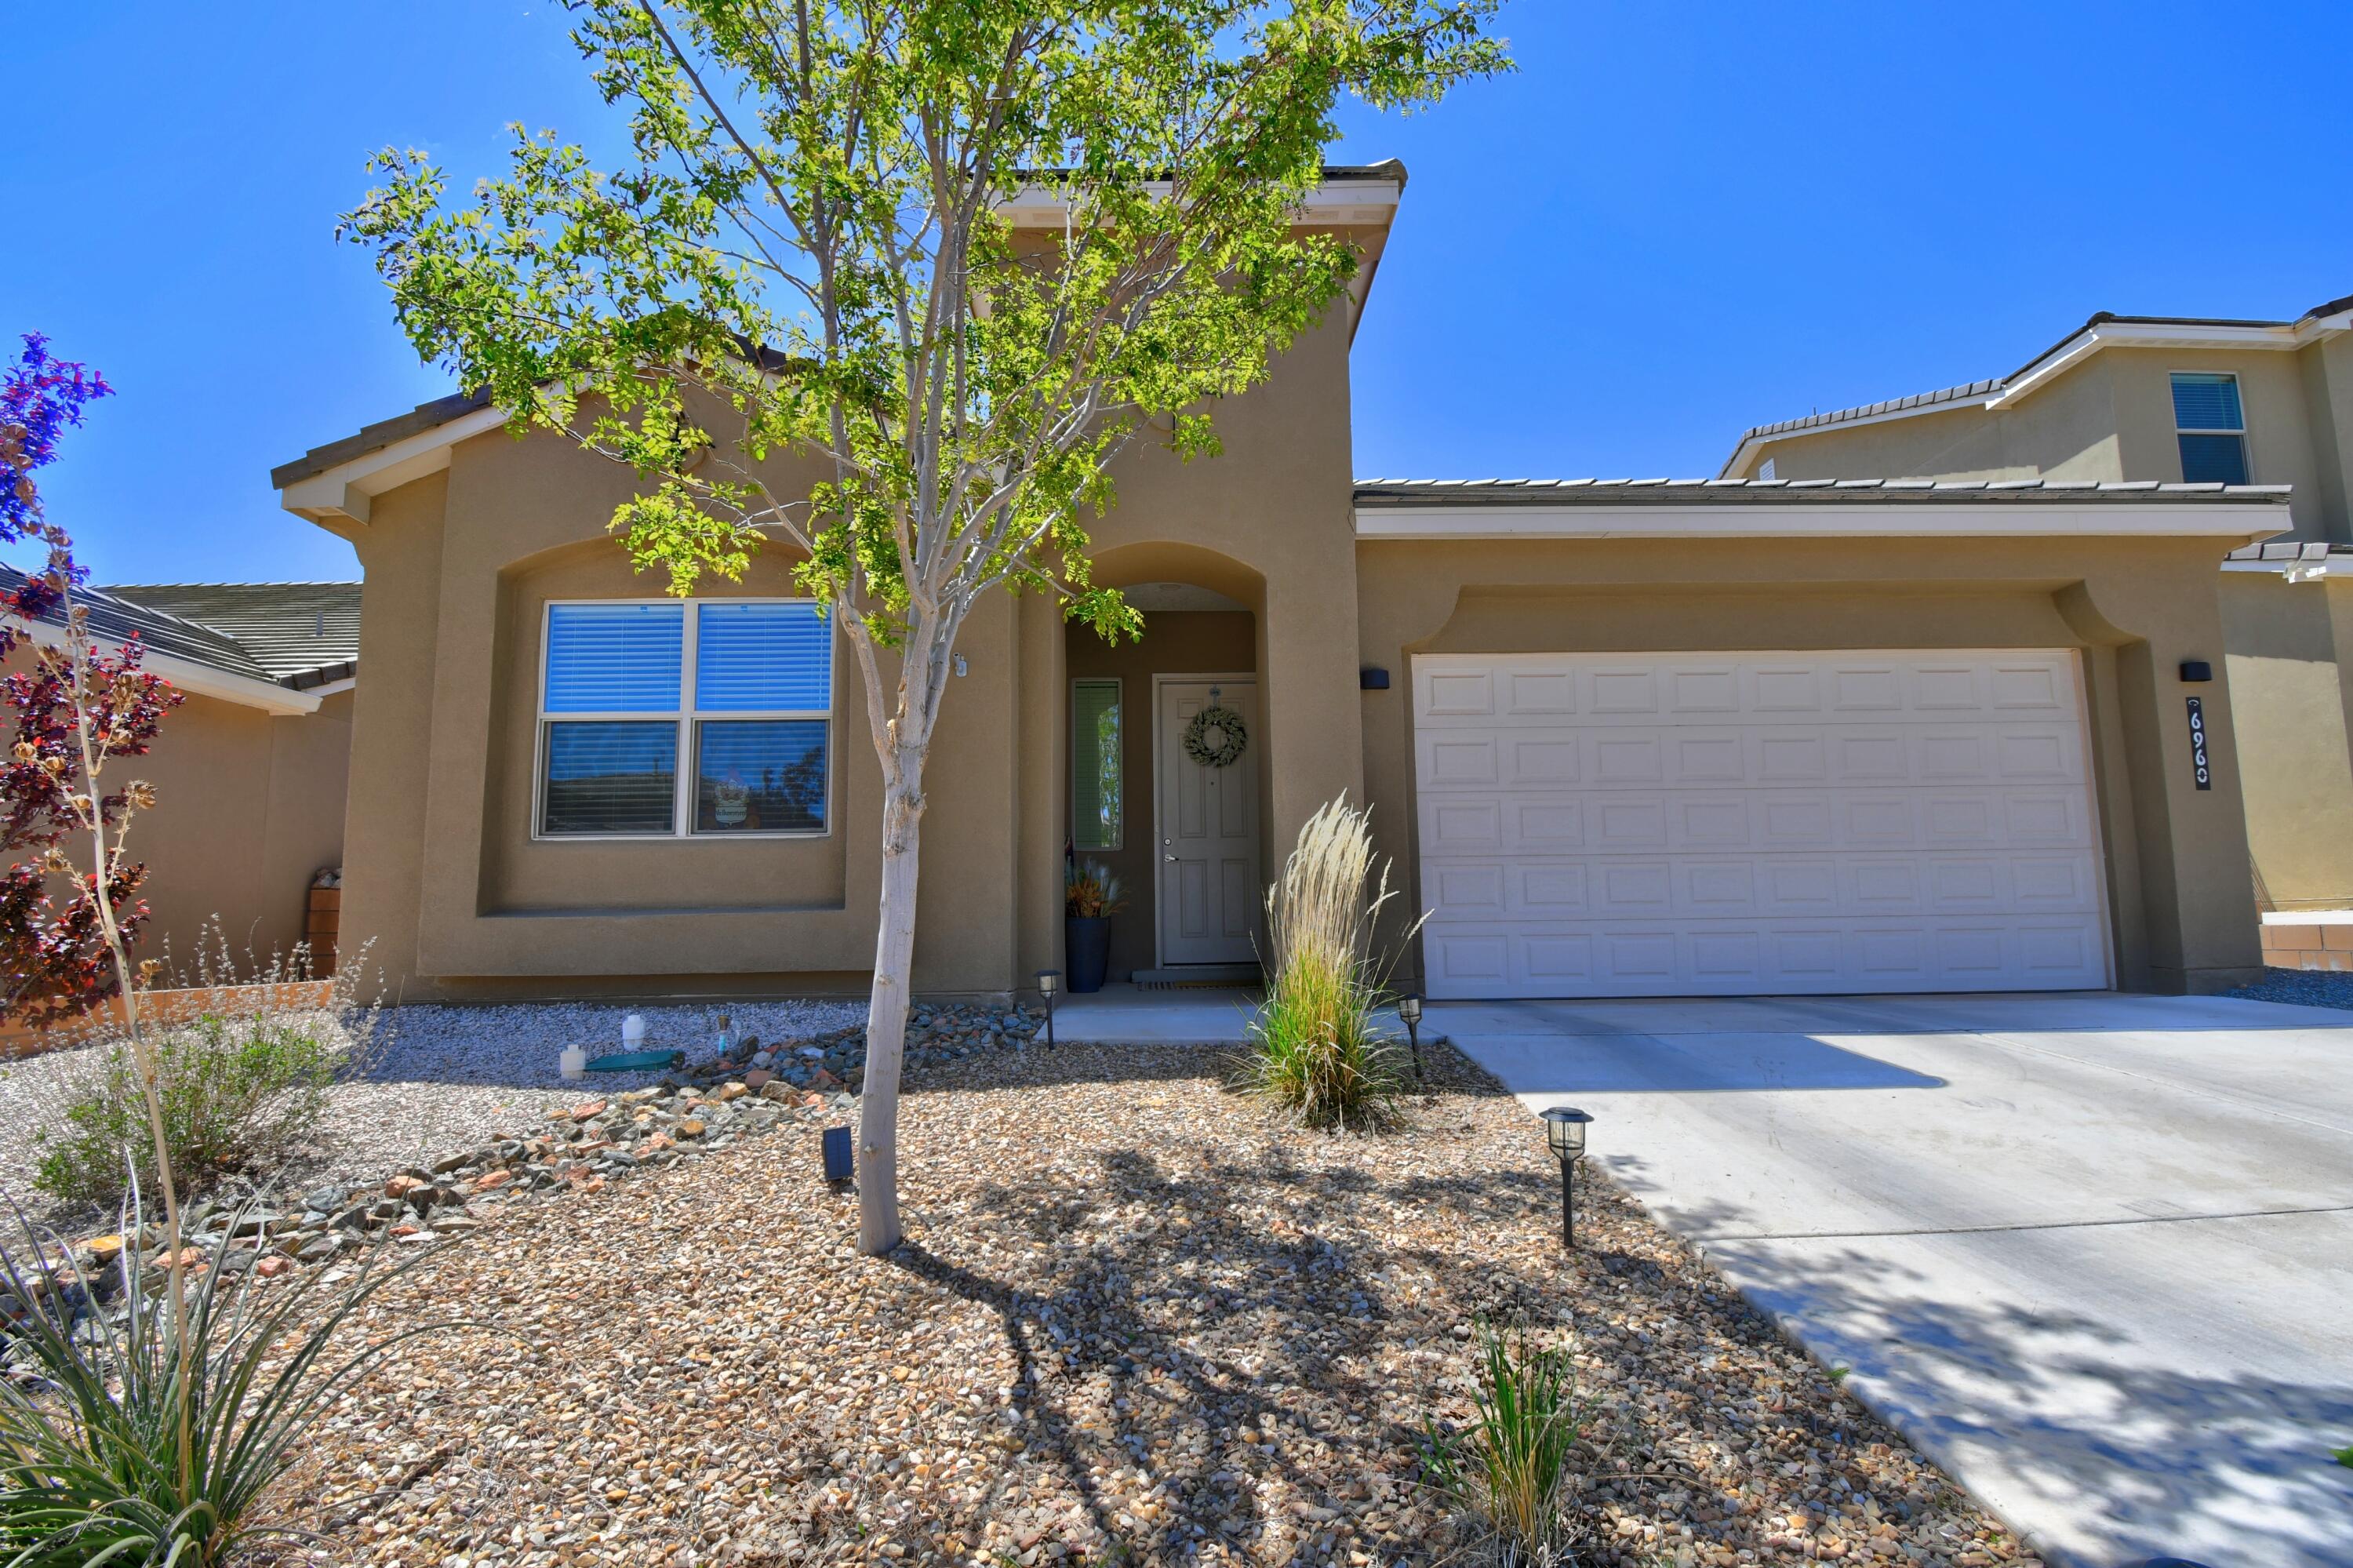 6960 Dusty Drive NE, Rio Rancho, New Mexico 87144, 3 Bedrooms Bedrooms, ,2 BathroomsBathrooms,Residential,For Sale,6960 Dusty Drive NE,1060751